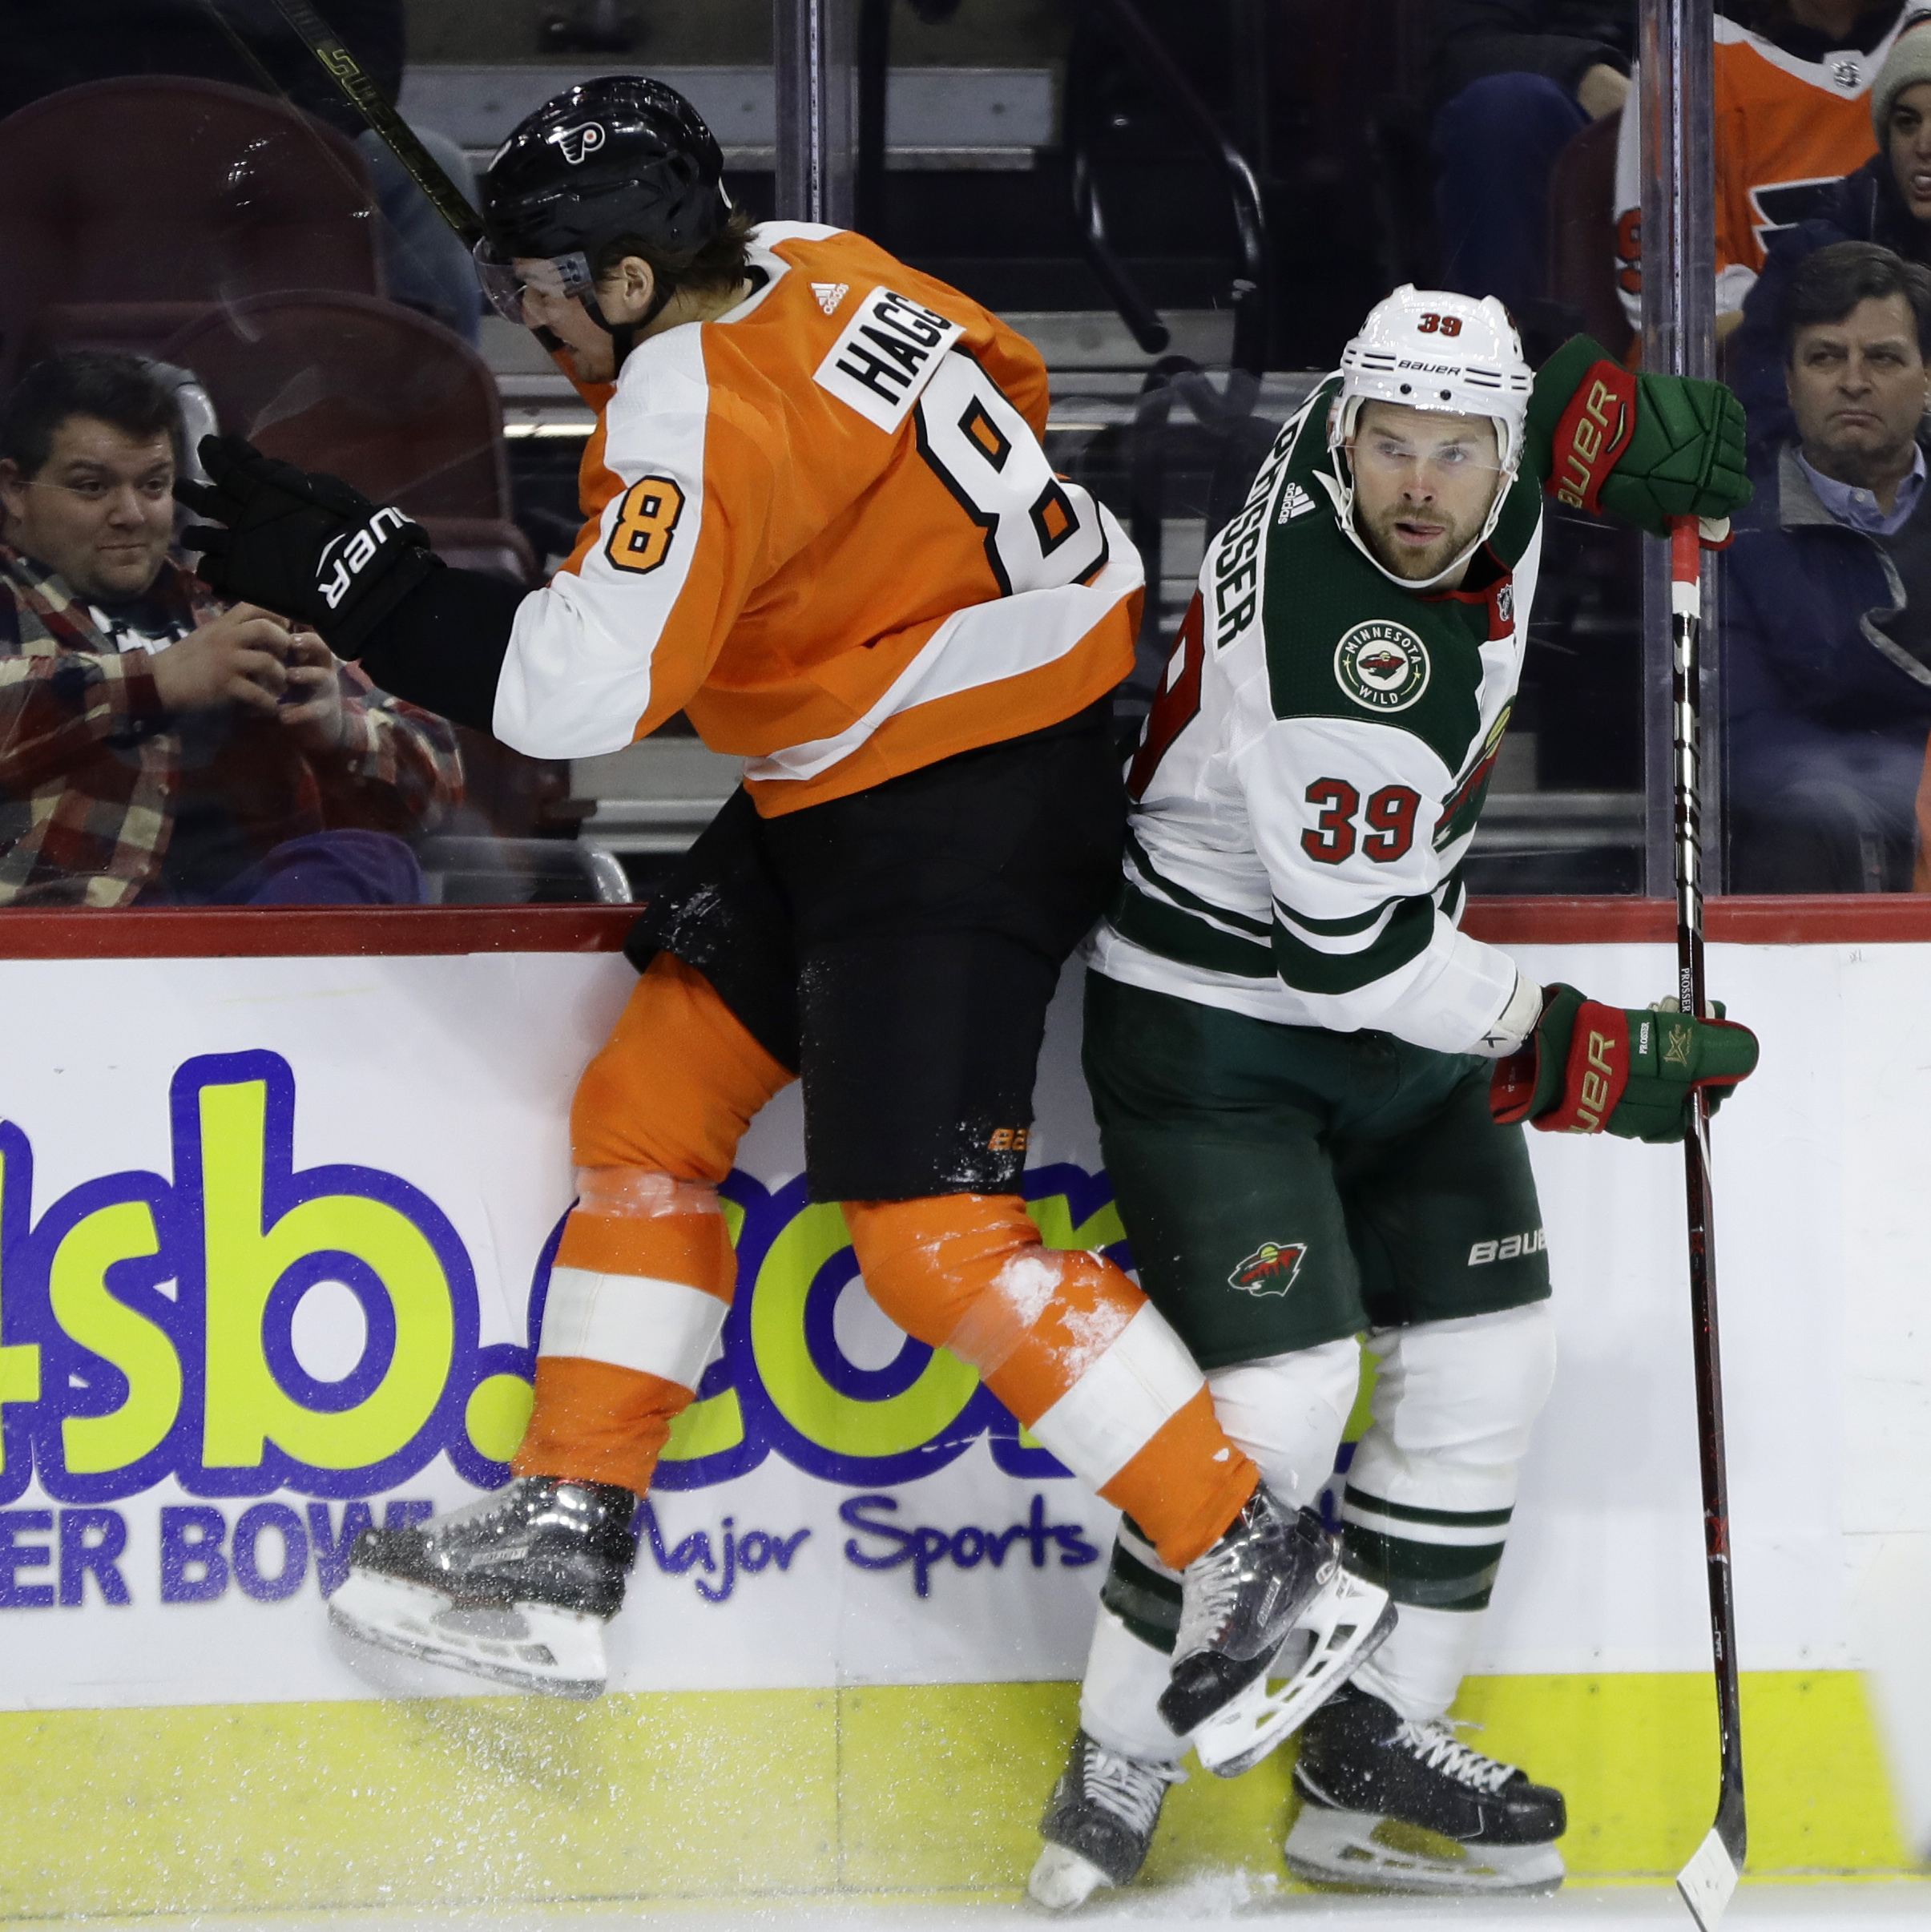 Flyers top Wild 7-4 for 2nd victory in last 11 games